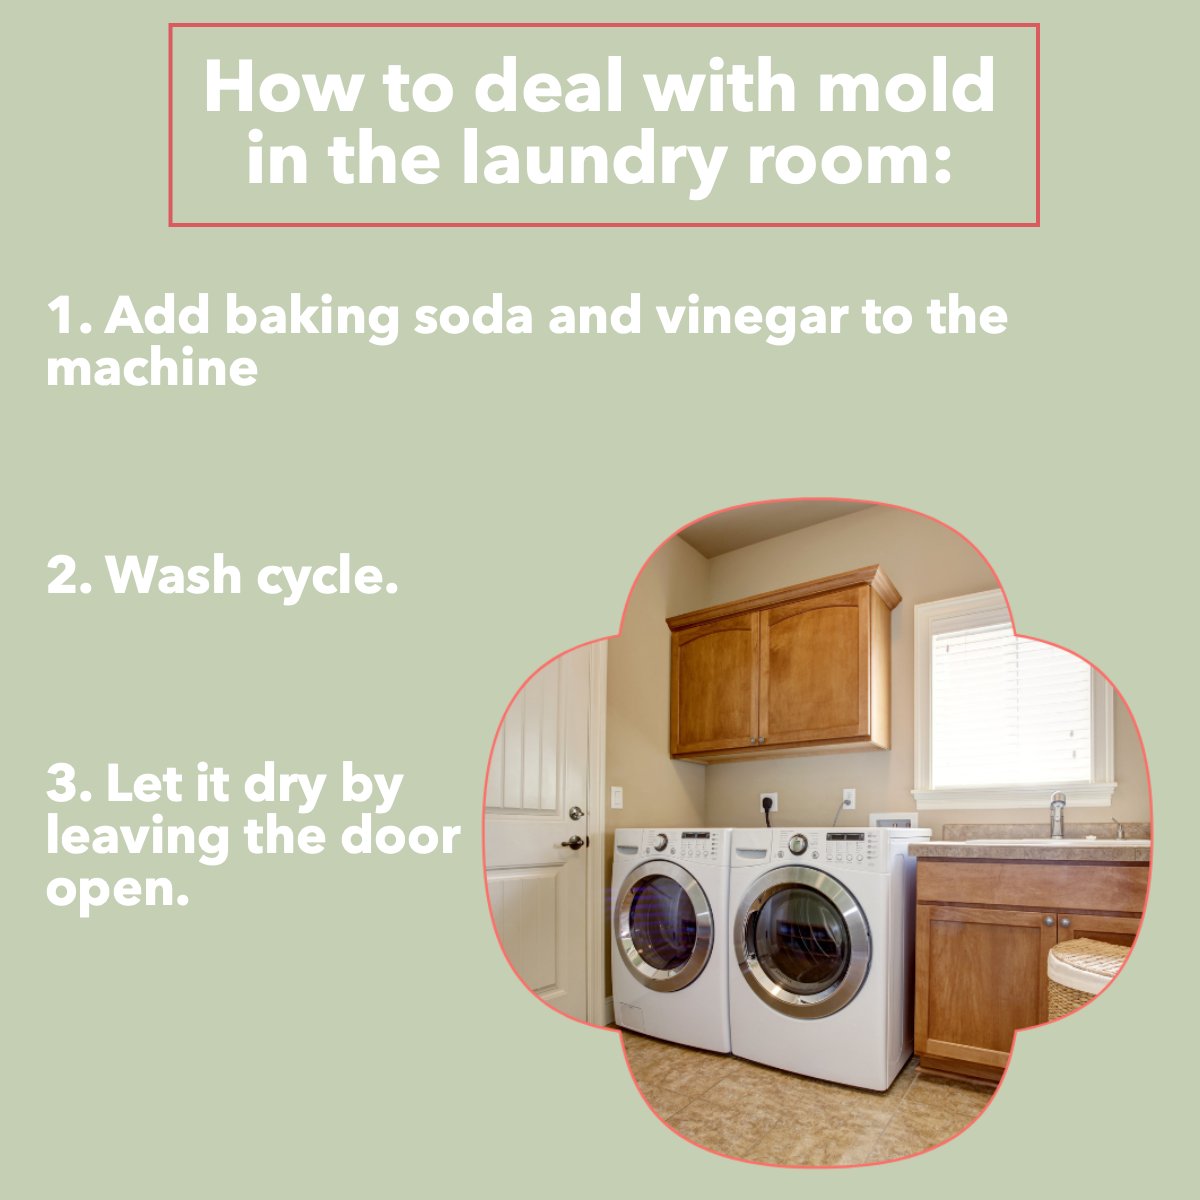 Tired to deal with mold in your laundry room😫 check tips below 🧺

#laundryroom #laundryroomgoals #laundryroomhacks #cleanhouse
 #castleteamdoesitagain #castleinbrooklyn #kwnyc #castleteamrealestate #carolcastlekwnyc